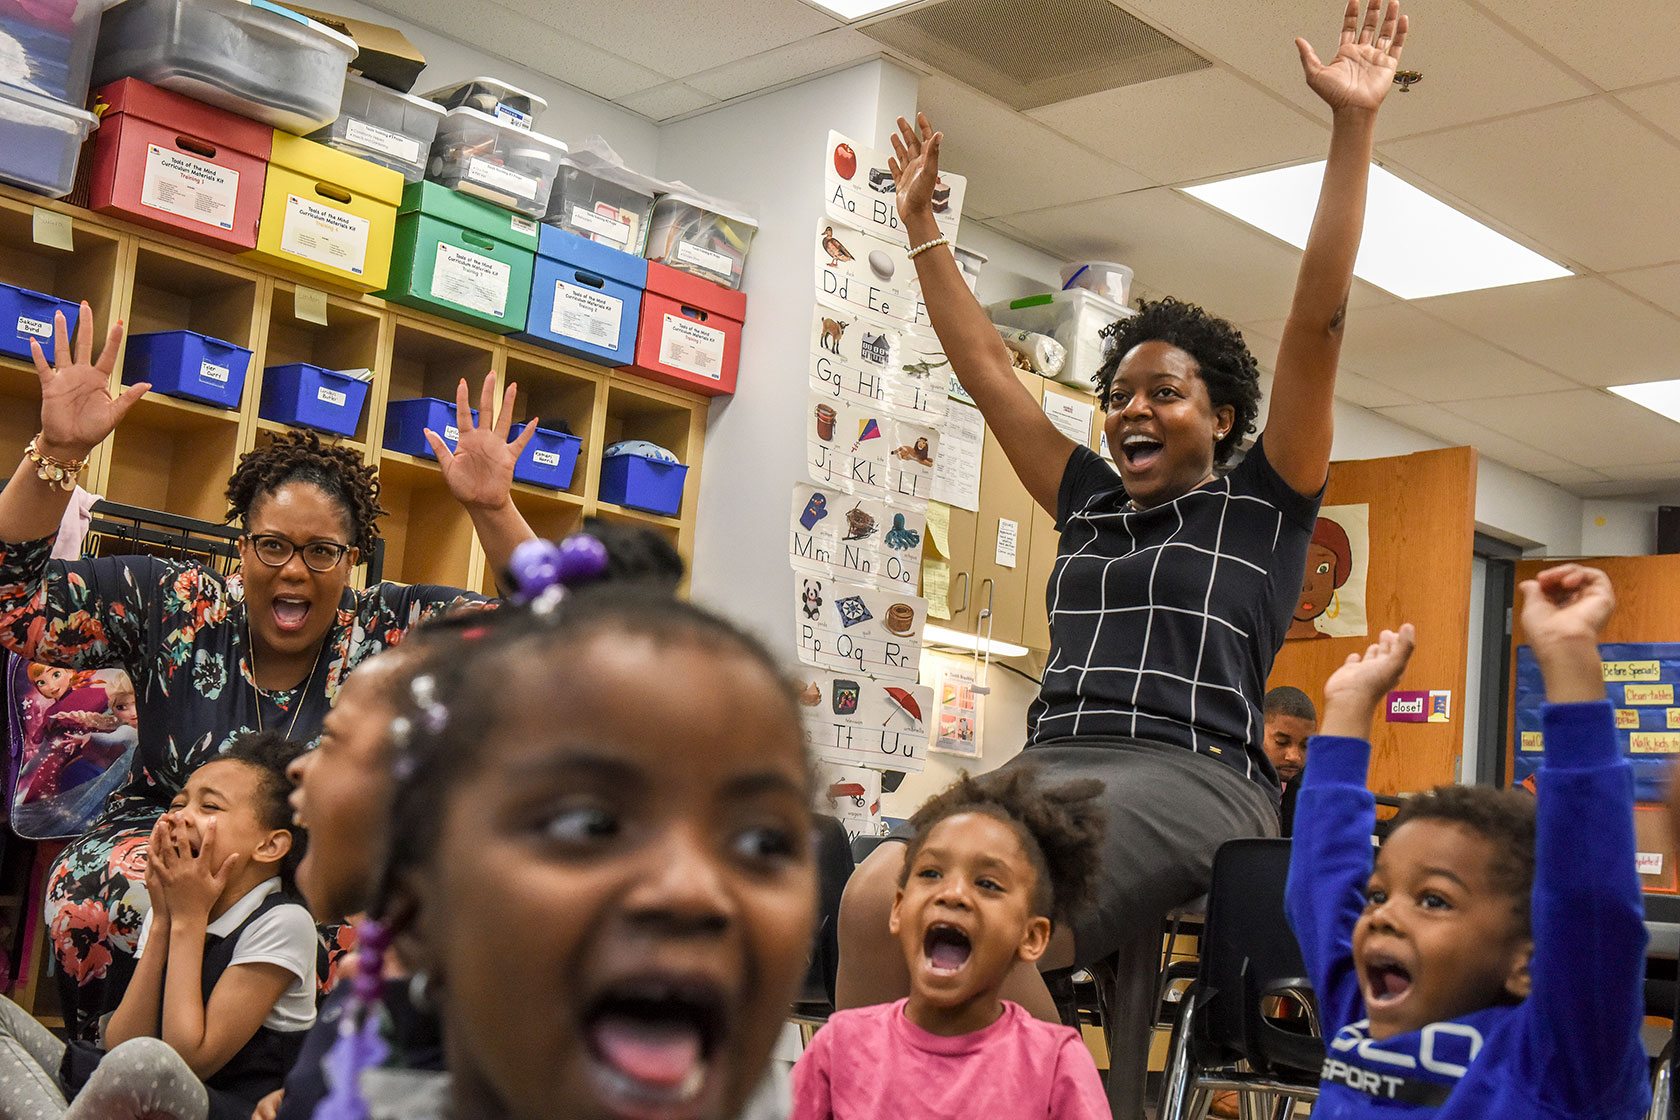 Preschool students in Washington, D.C., are joined by the interim chancellor for District of Columbia Public Schools.